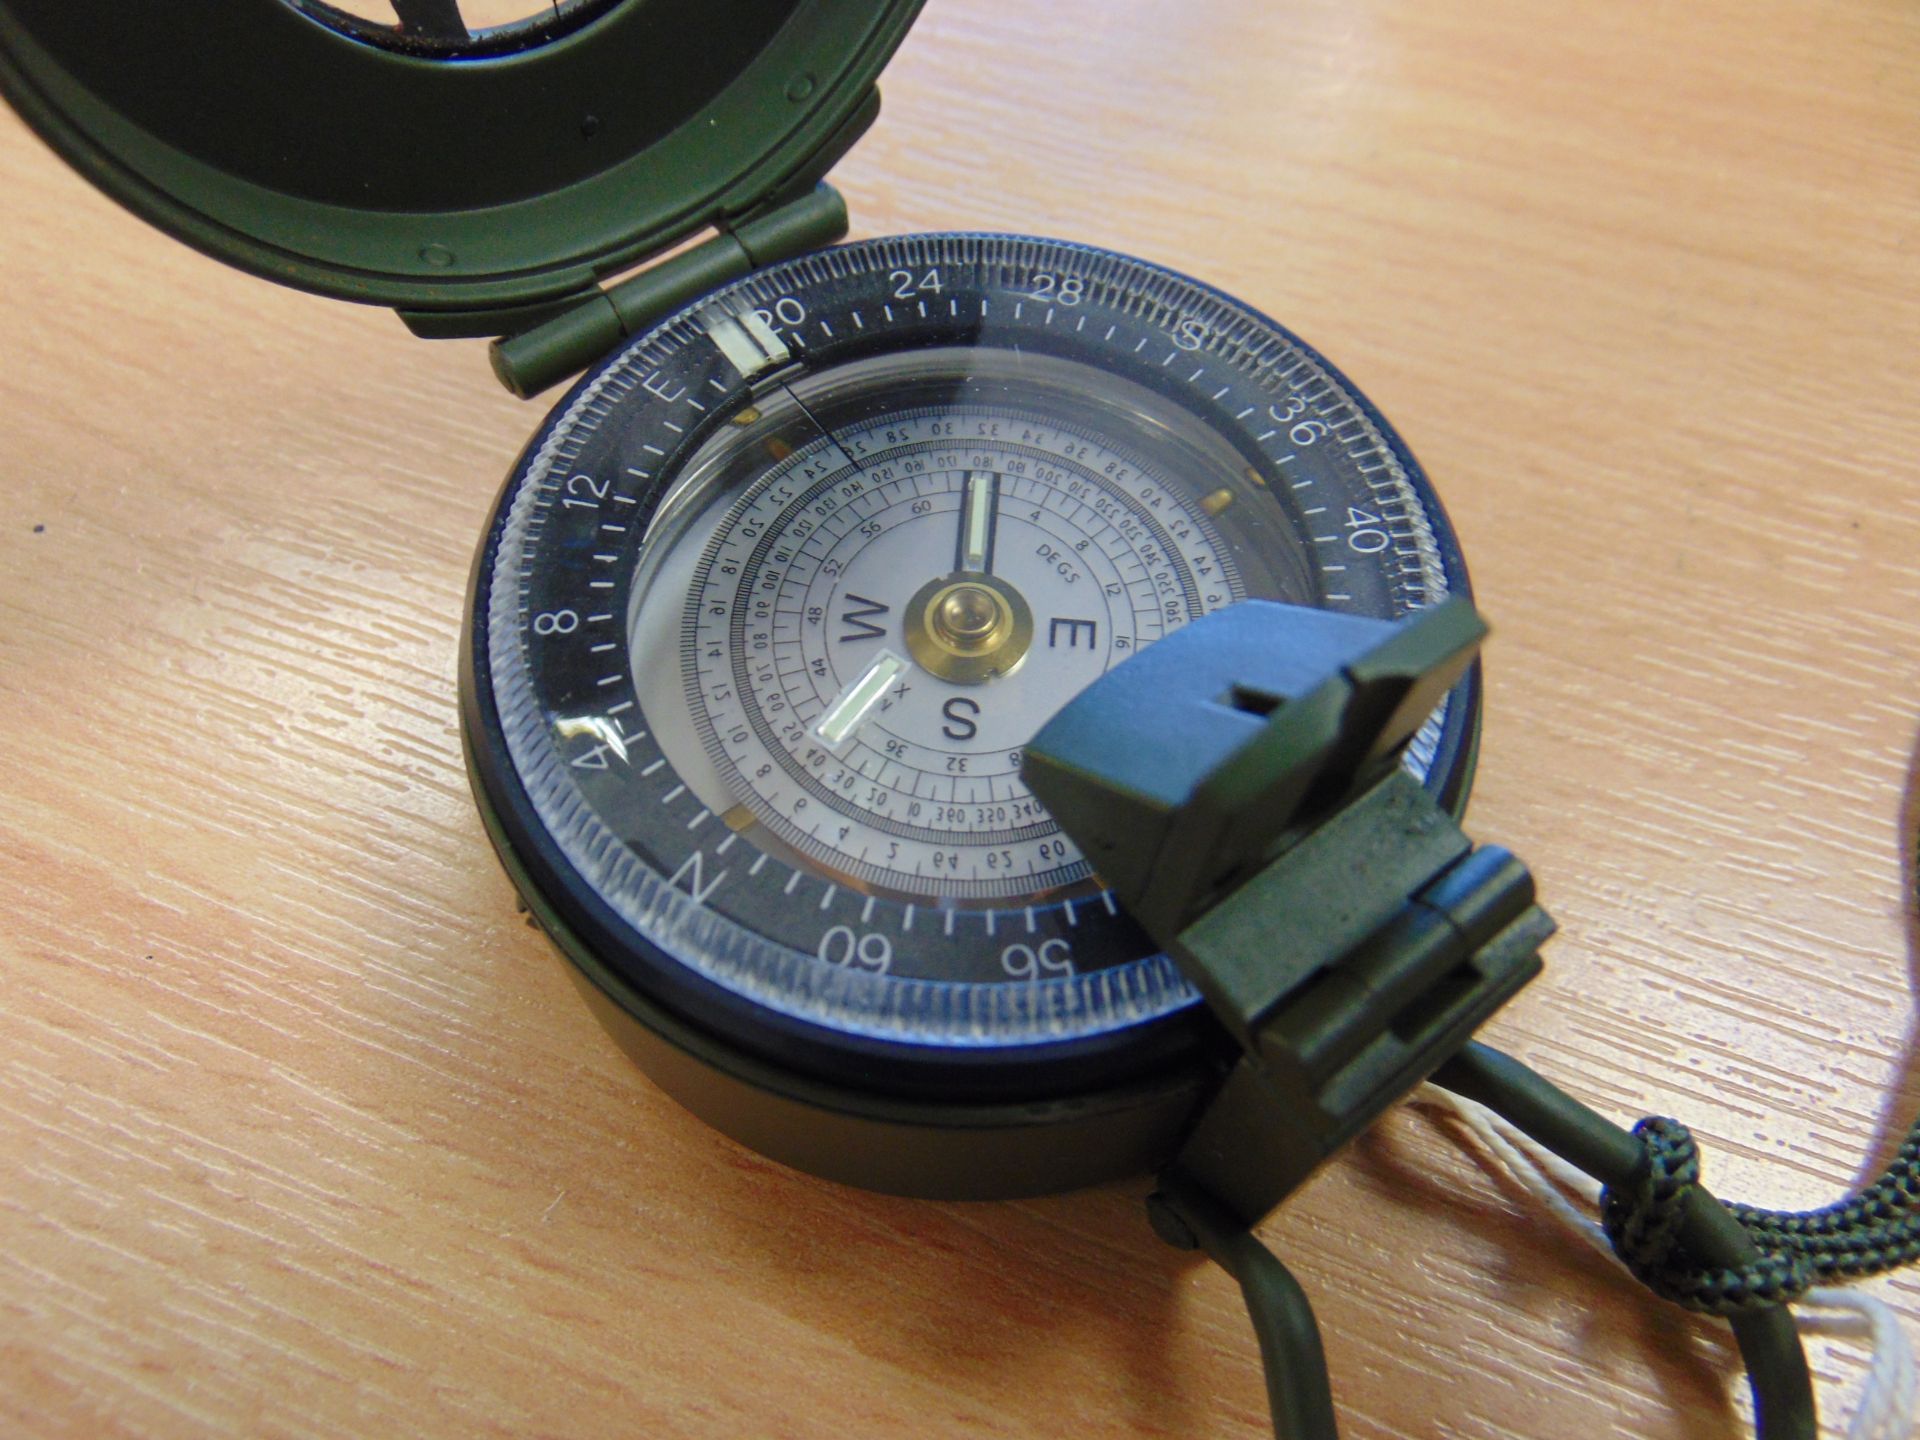 Genuine Unissued British Army Francis Barker M88 Marching Compass - Image 4 of 7